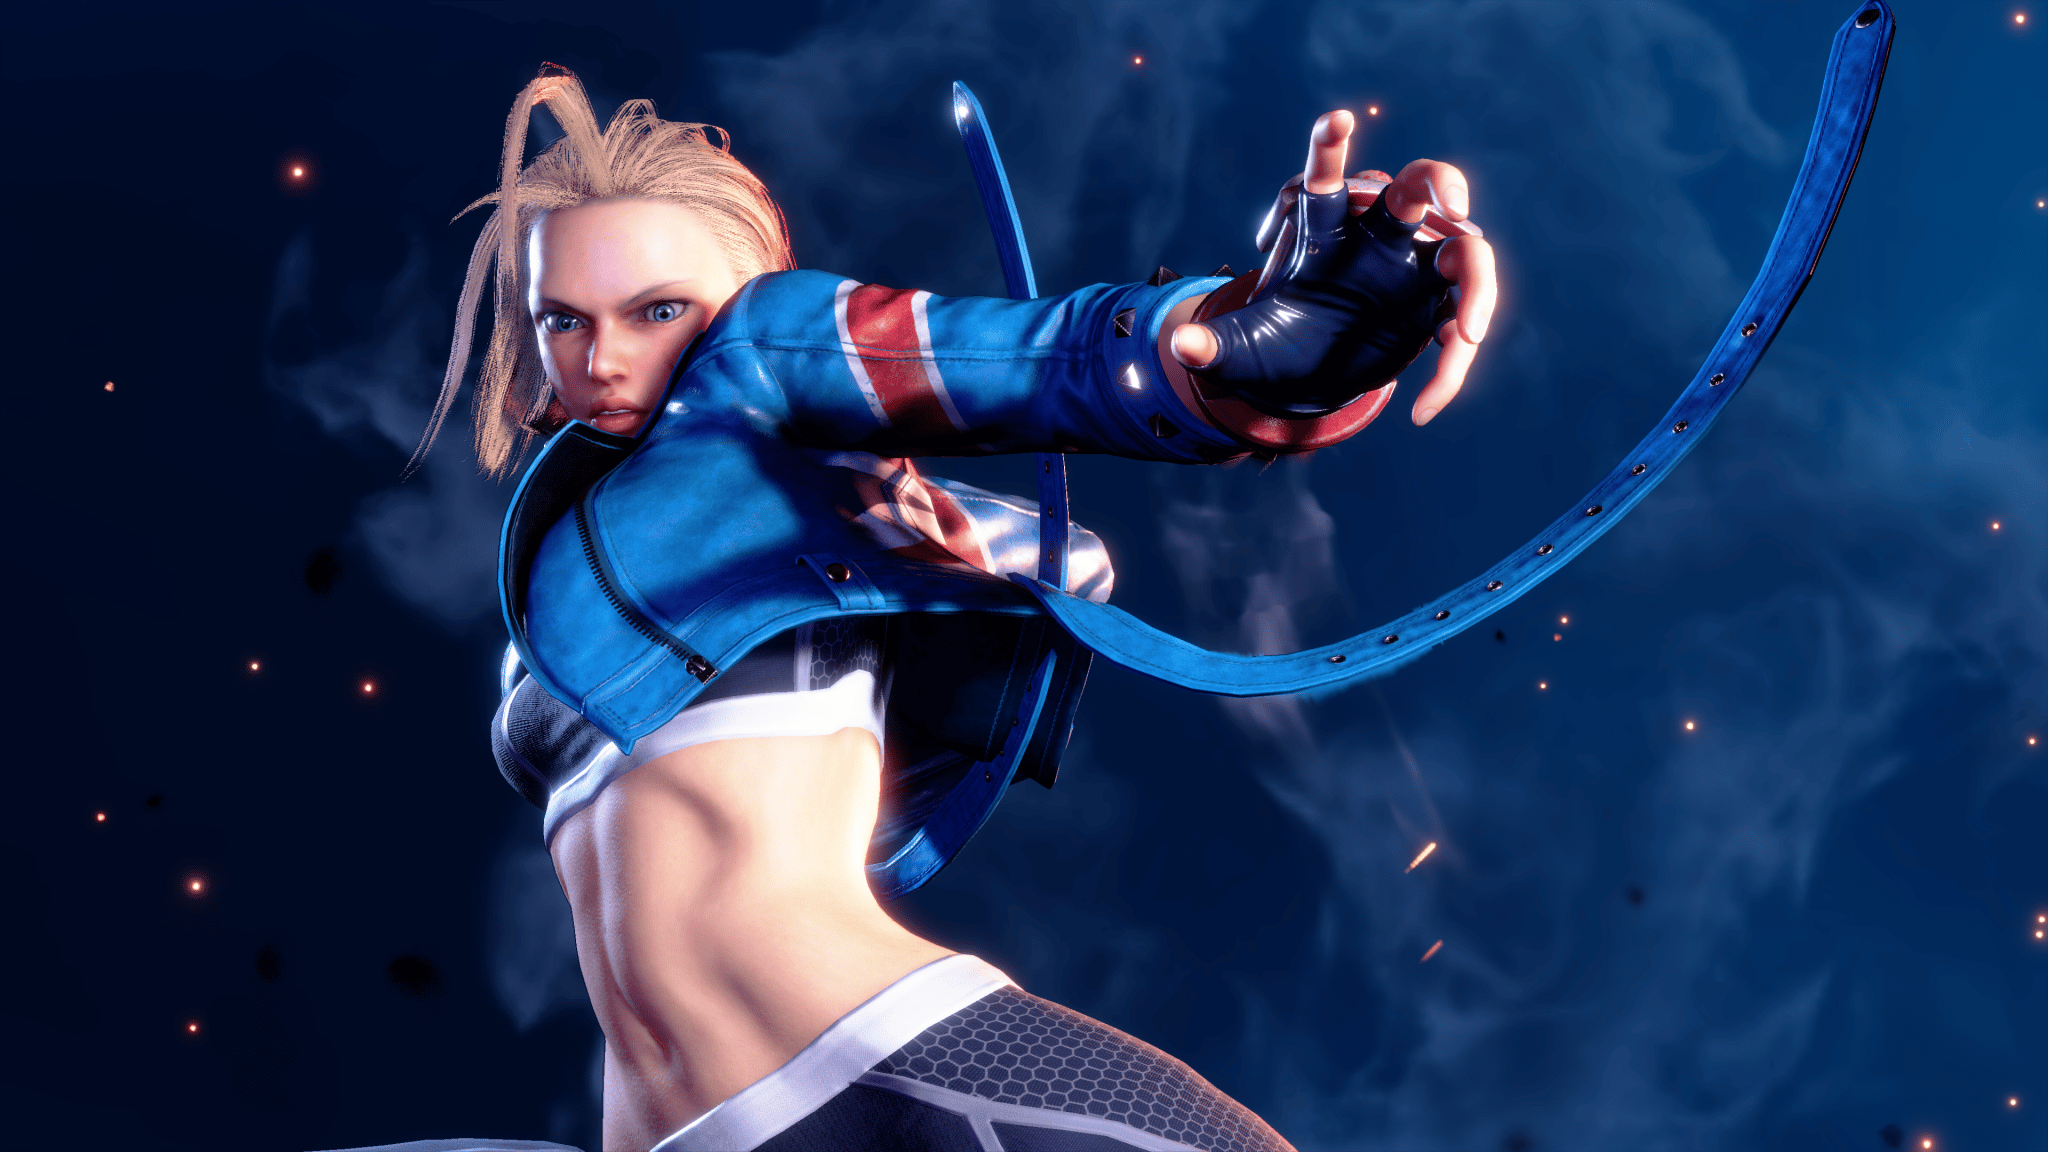 New Street Fighter Live-Action Movie Announced; Co-Produced by Legendary Entertainment